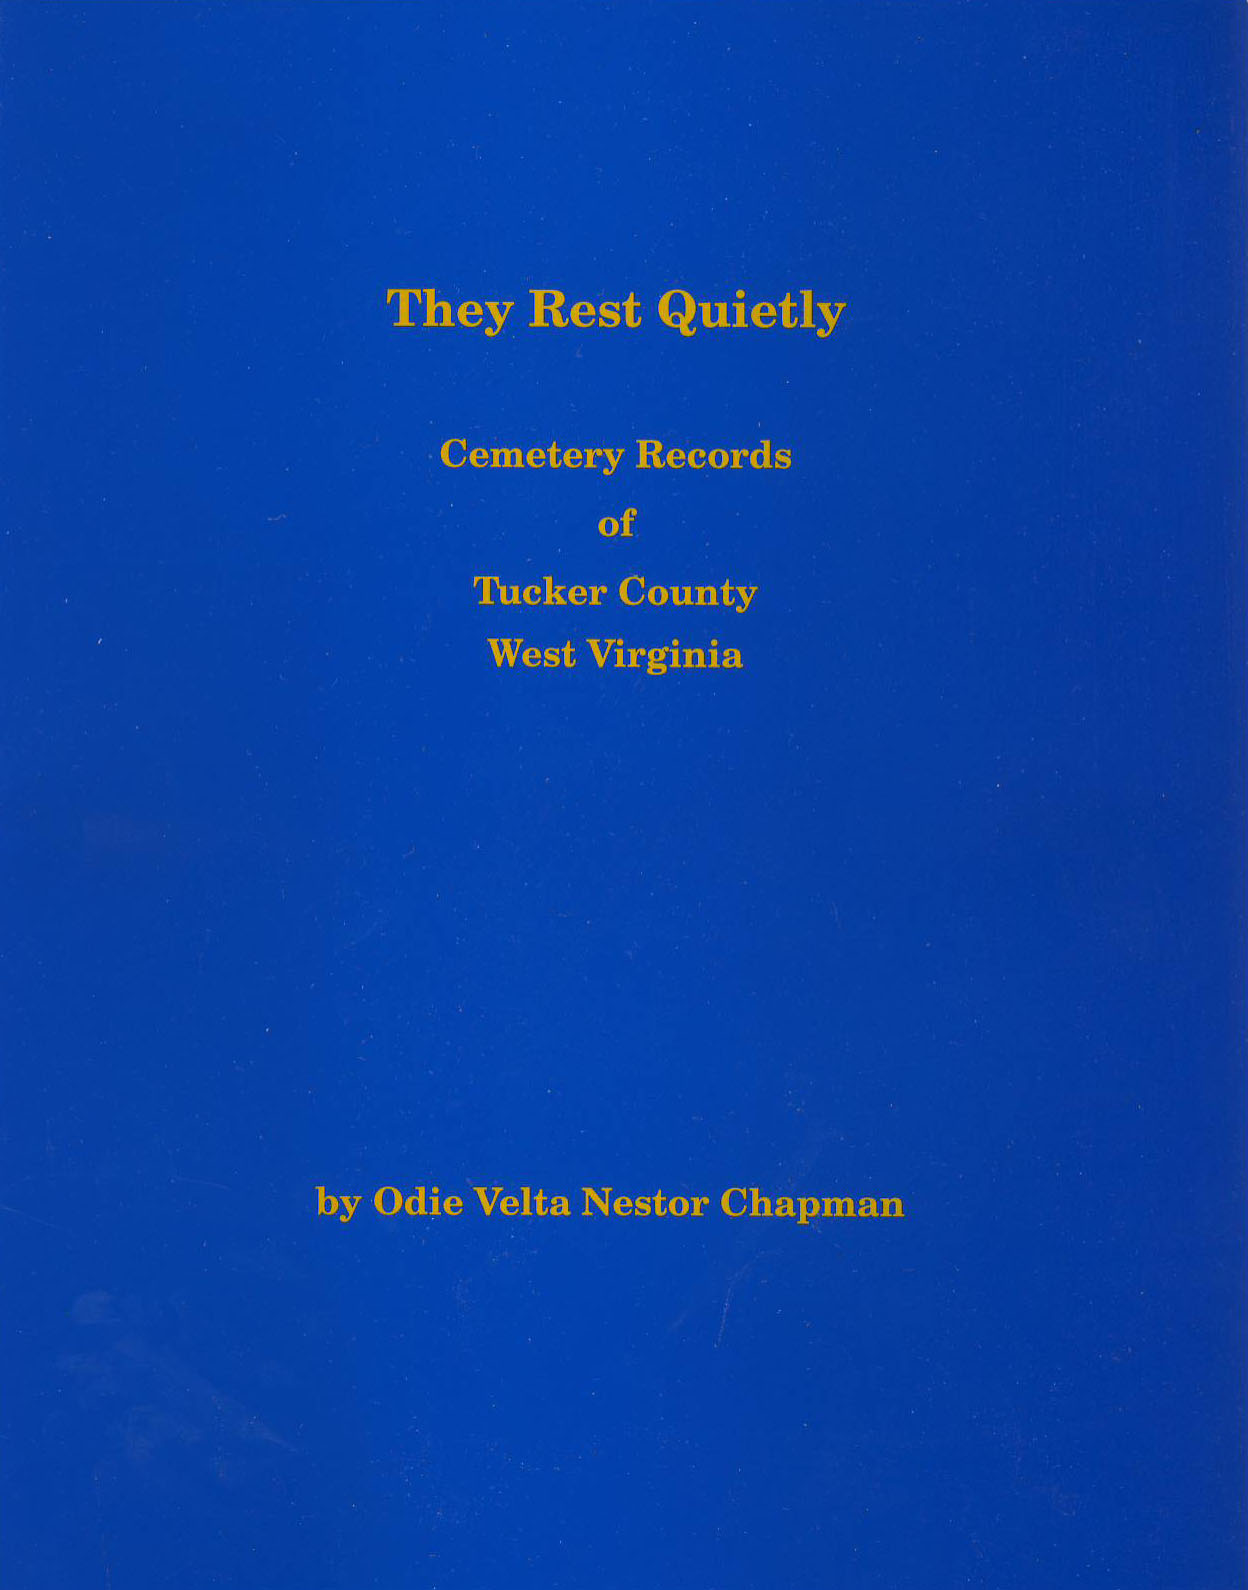 They Rest Quietly -- Cemetery Records of Tucker County, West Virginia